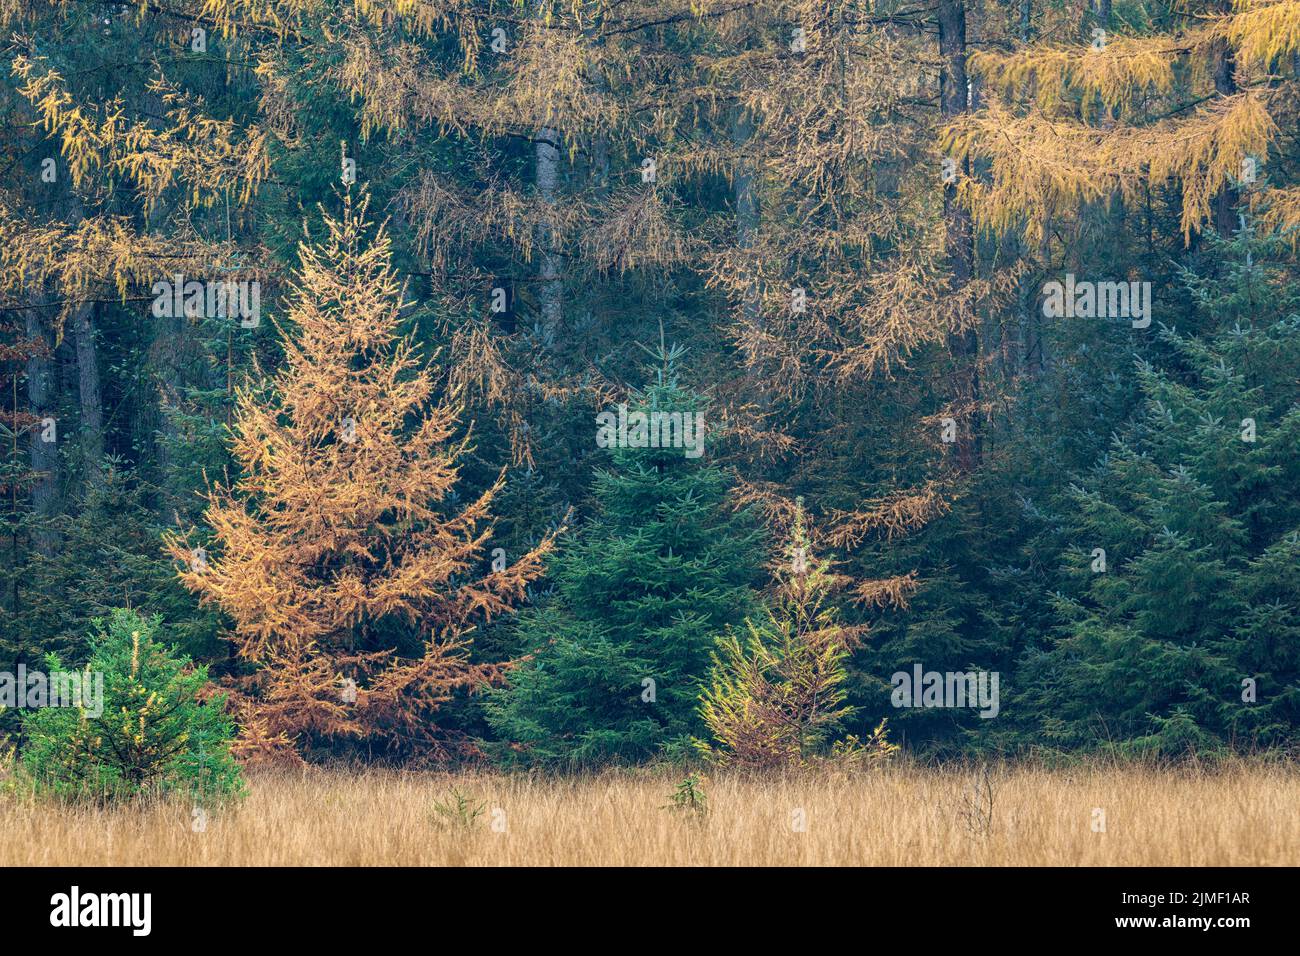 Larch forest in autumn at the edge of a bog Stock Photo